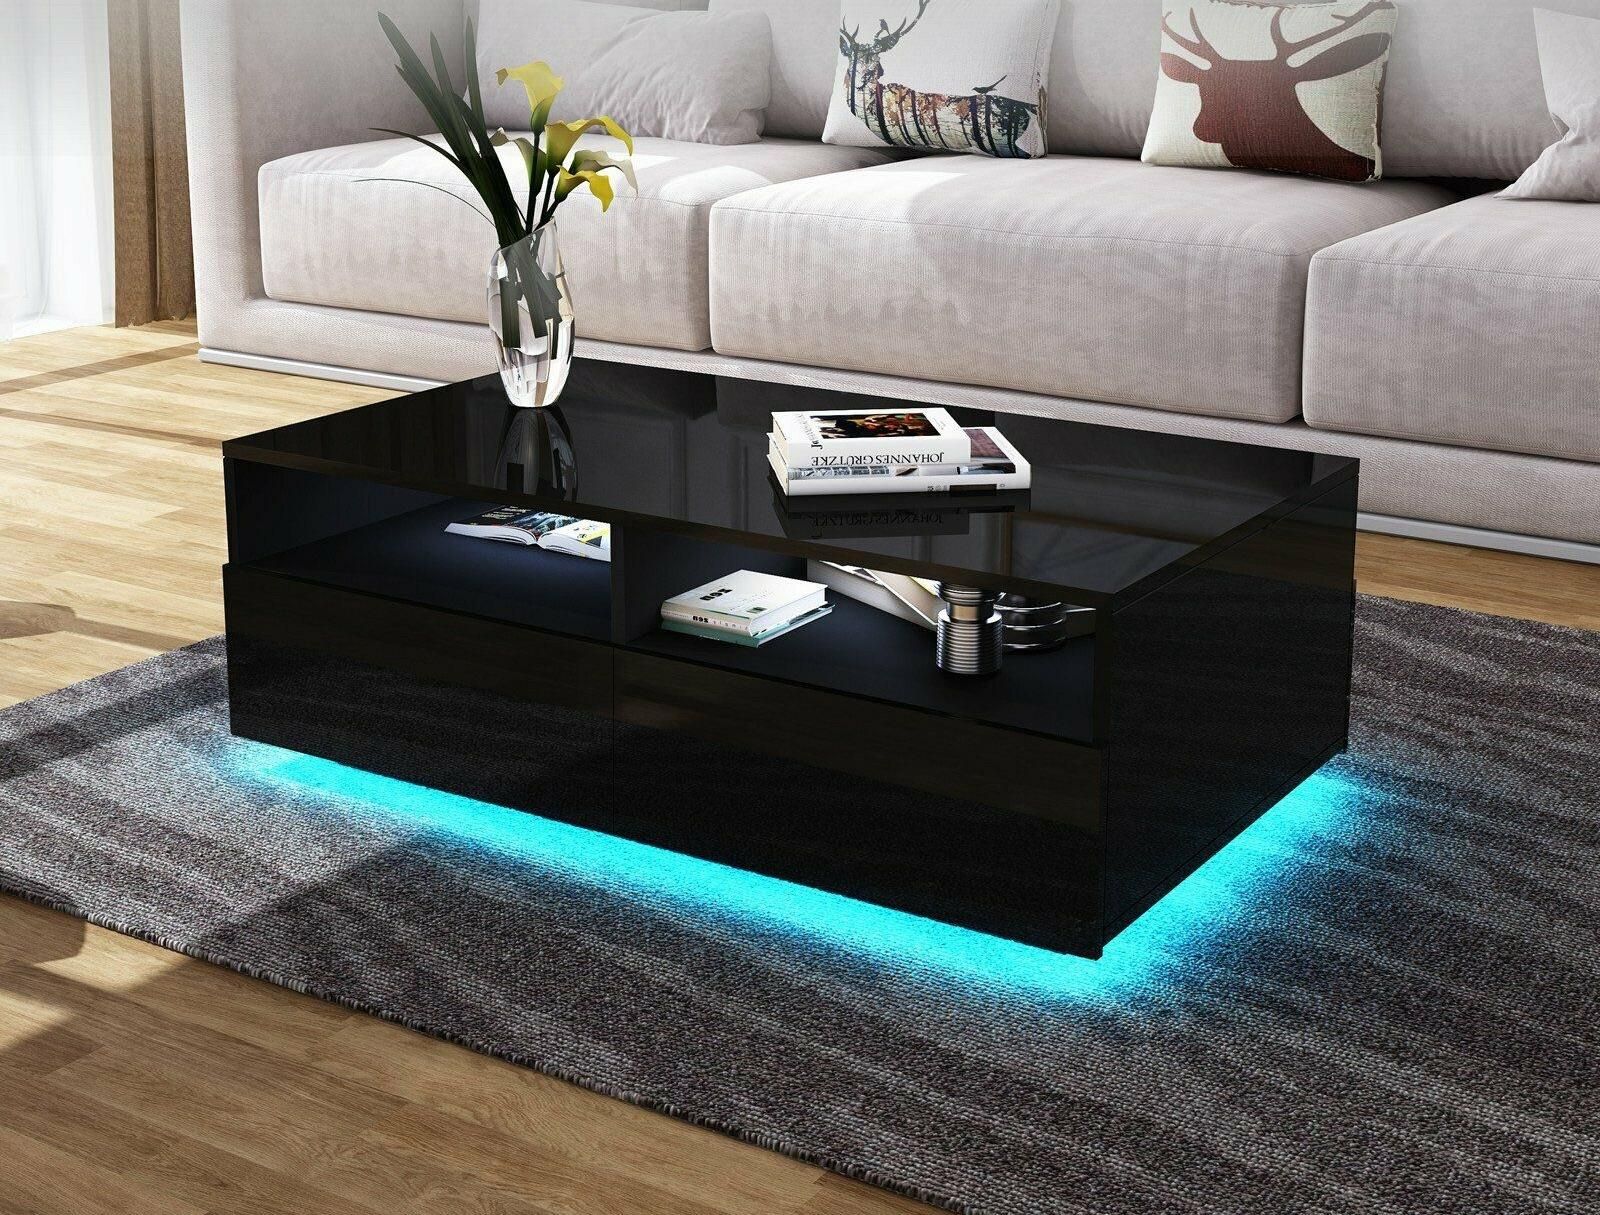 Living Room Rectangle Coffee Table 4 Drawers Rgb 16 Color Led Lights | Ebay Throughout Coffee Tables With Drawers And Led Lights (Gallery 7 of 20)